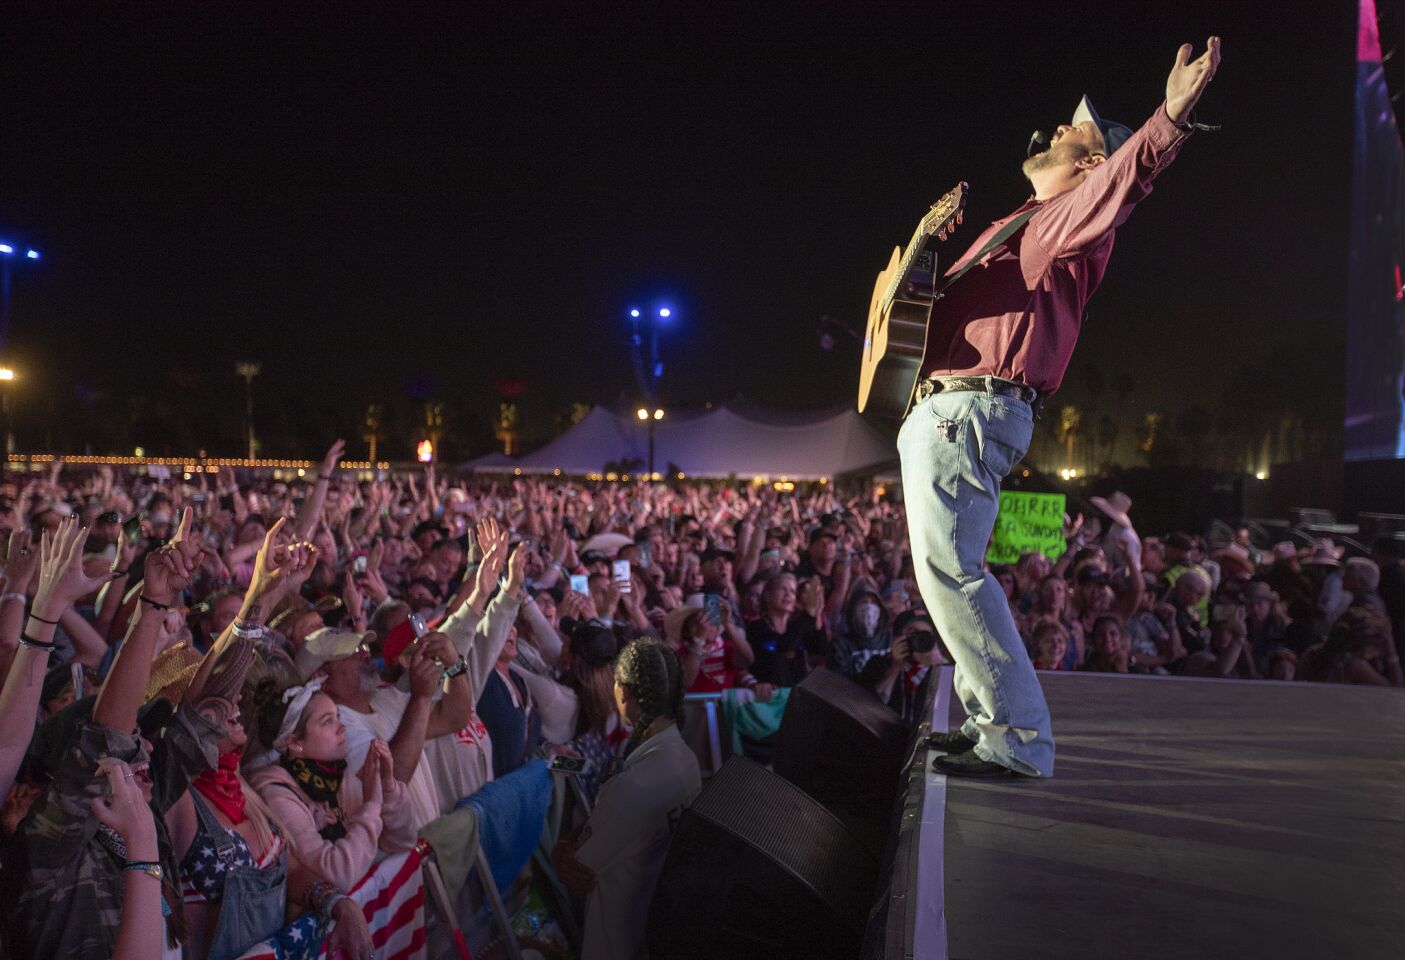 Fans applaud Garth Brooks at the festival in Indio on Sunday.